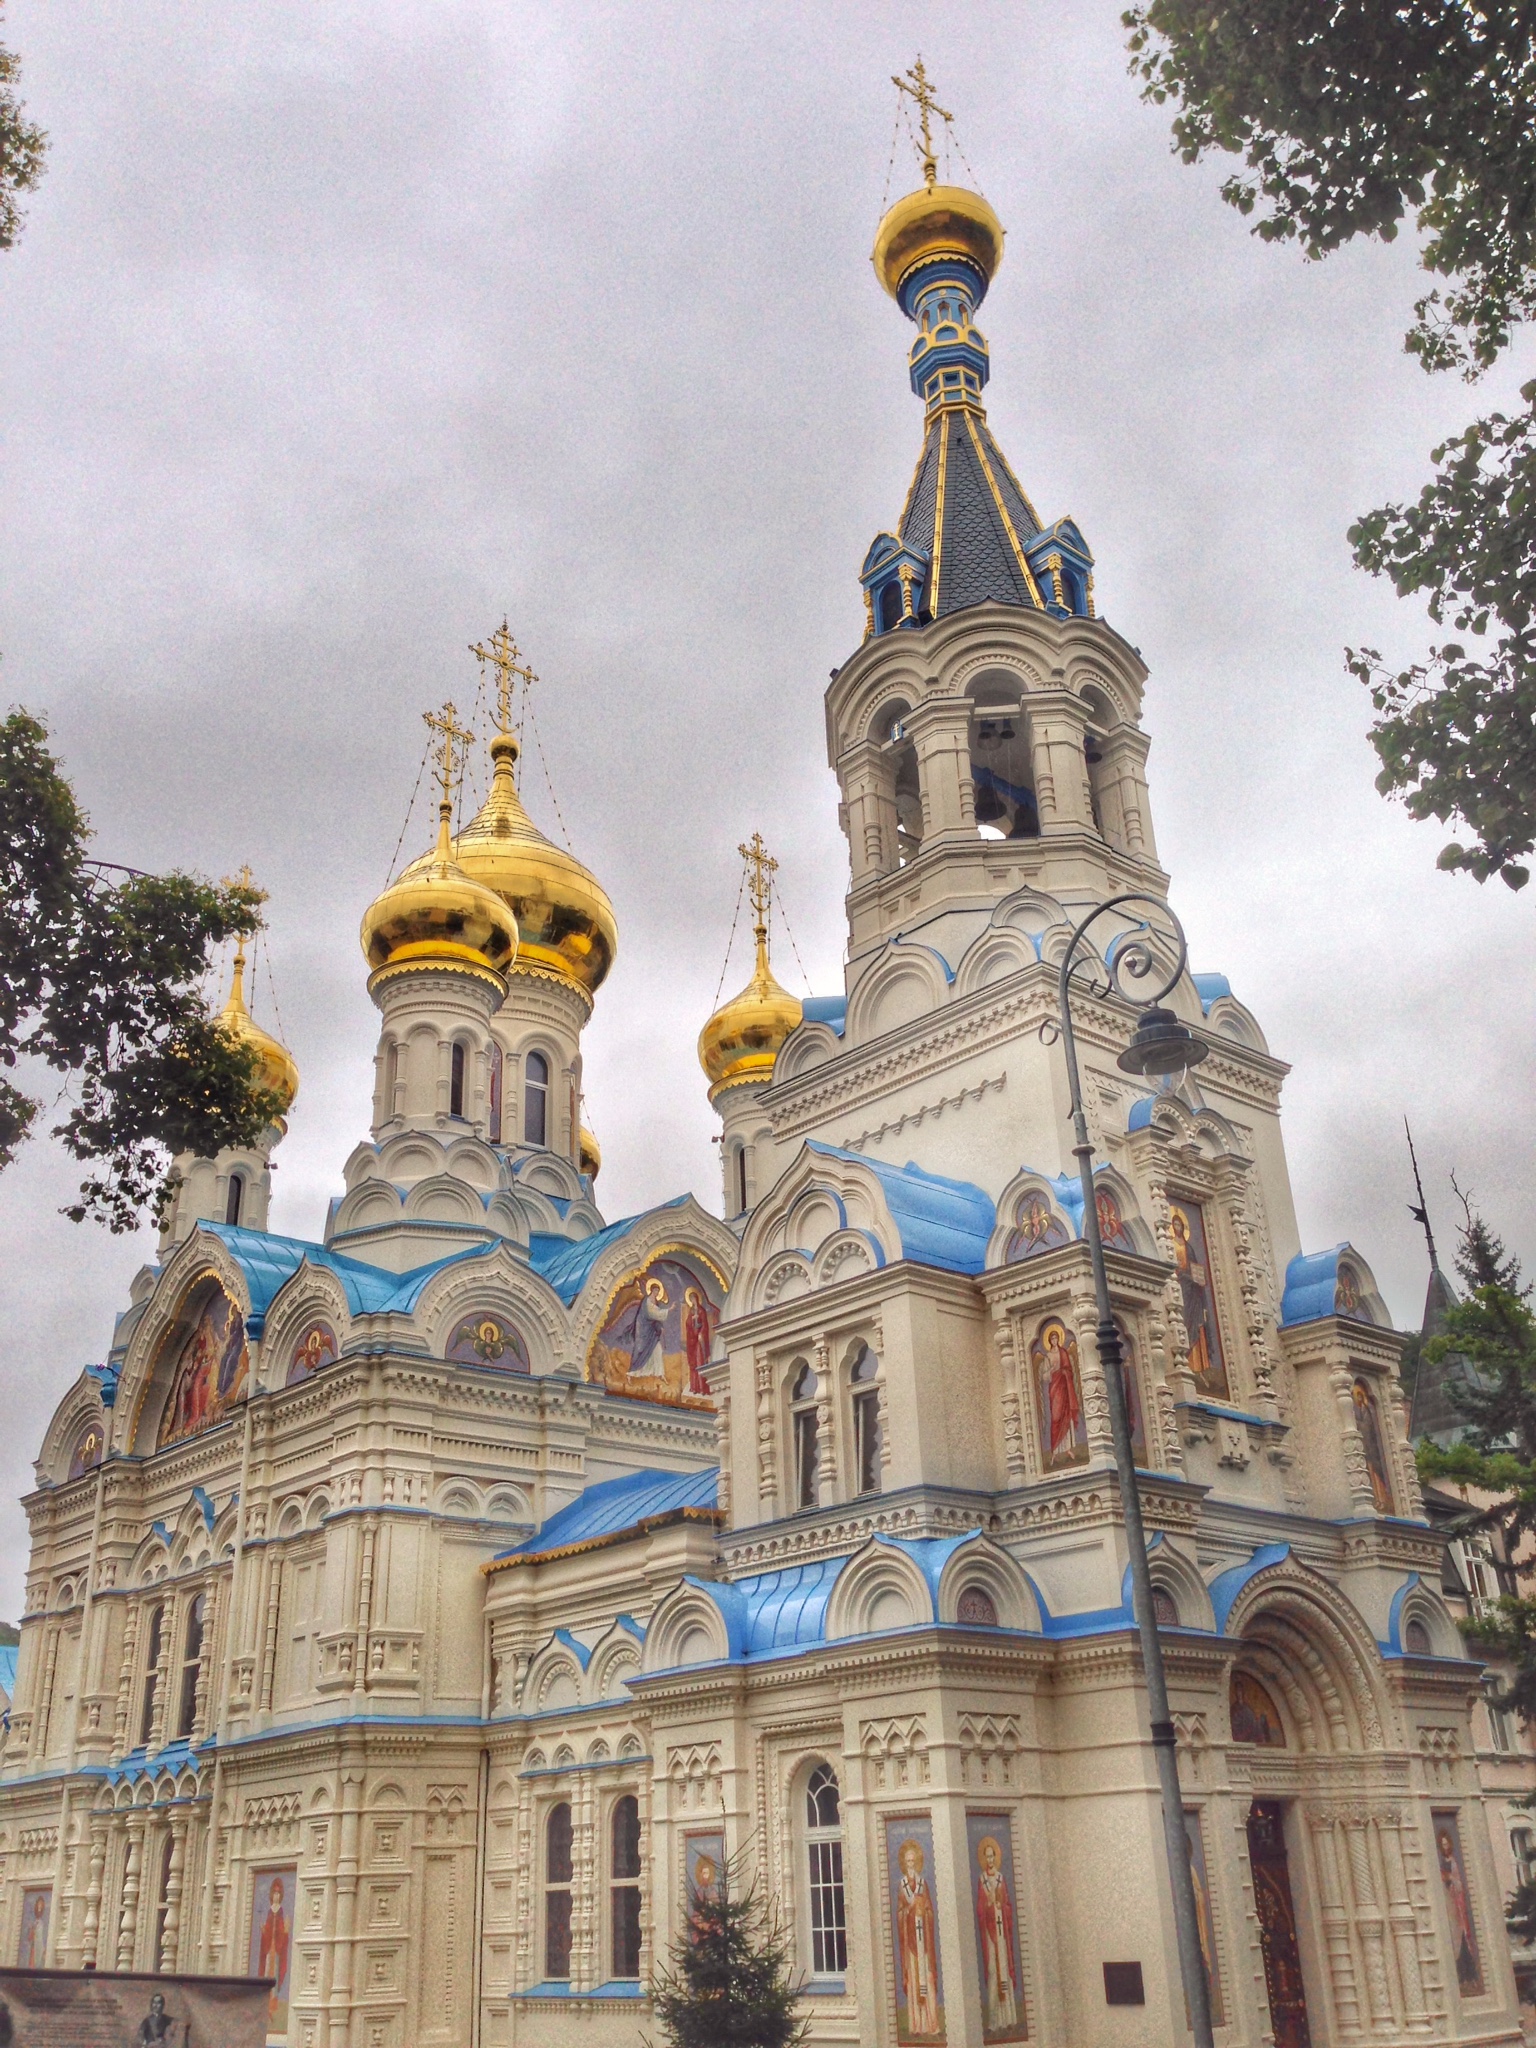 The Orthodox Church of St. Peter & Paul